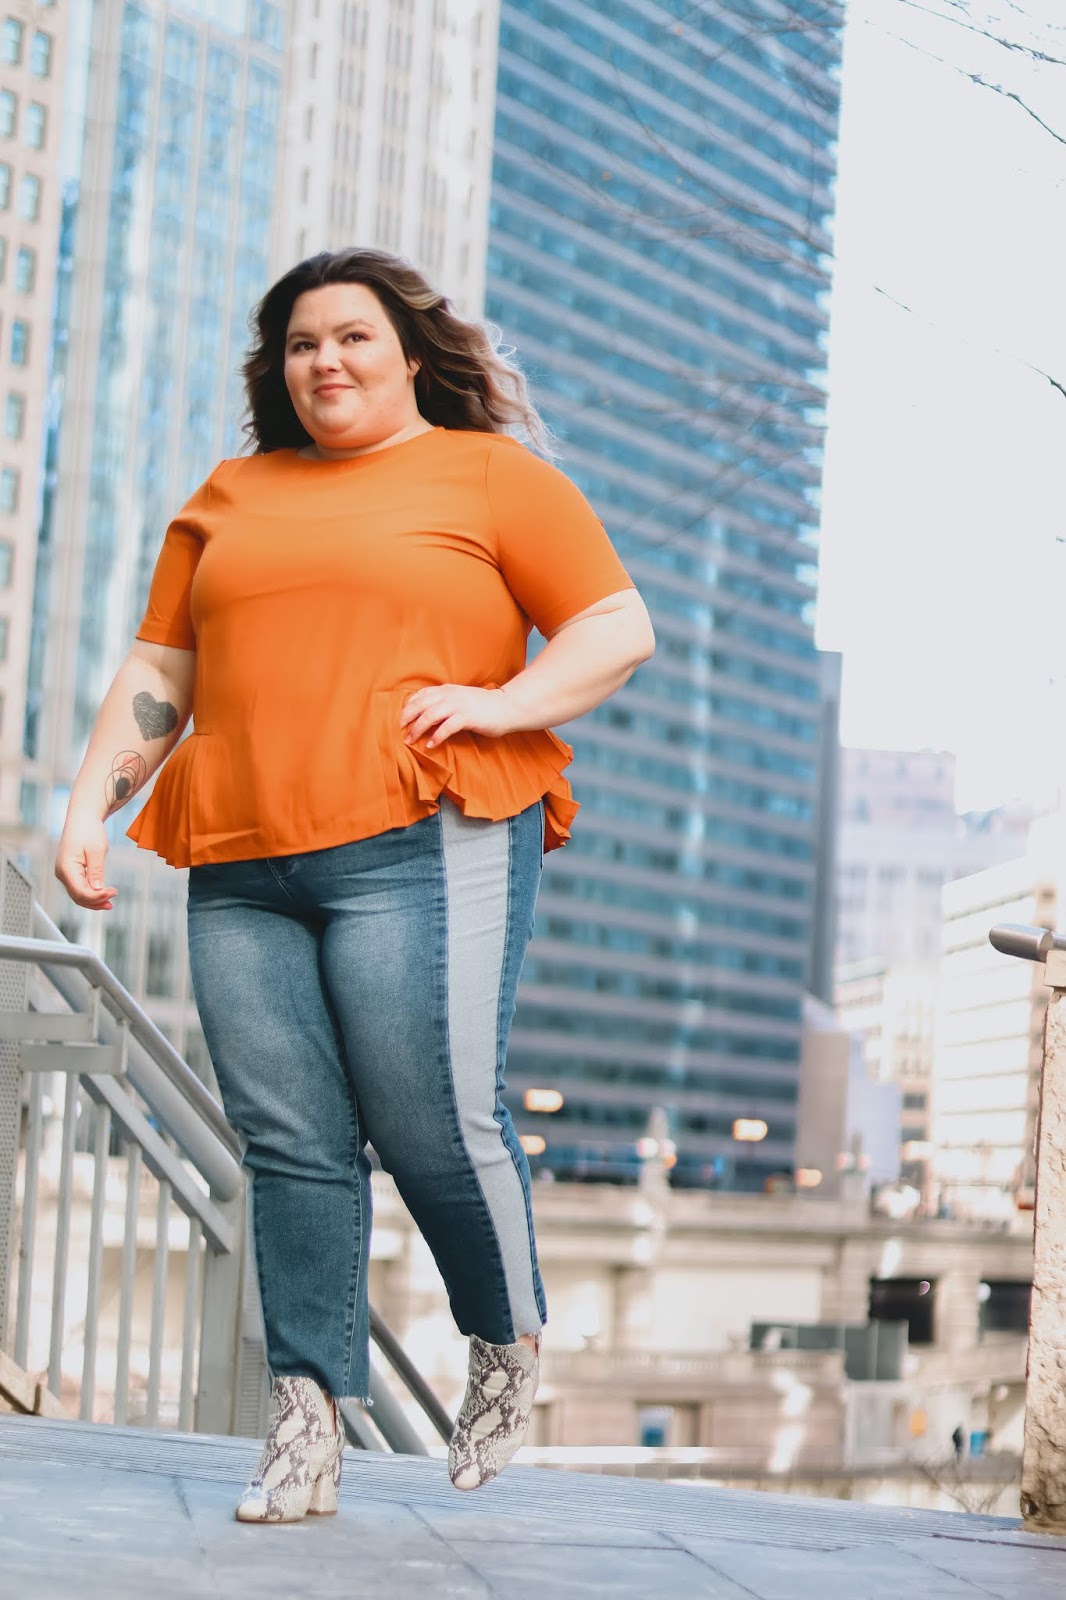 Chicago Plus Size Petite Fashion Blogger Natalie in the City reviews Eloquii's pleated hem top and relaxed two-tone mom jeans.